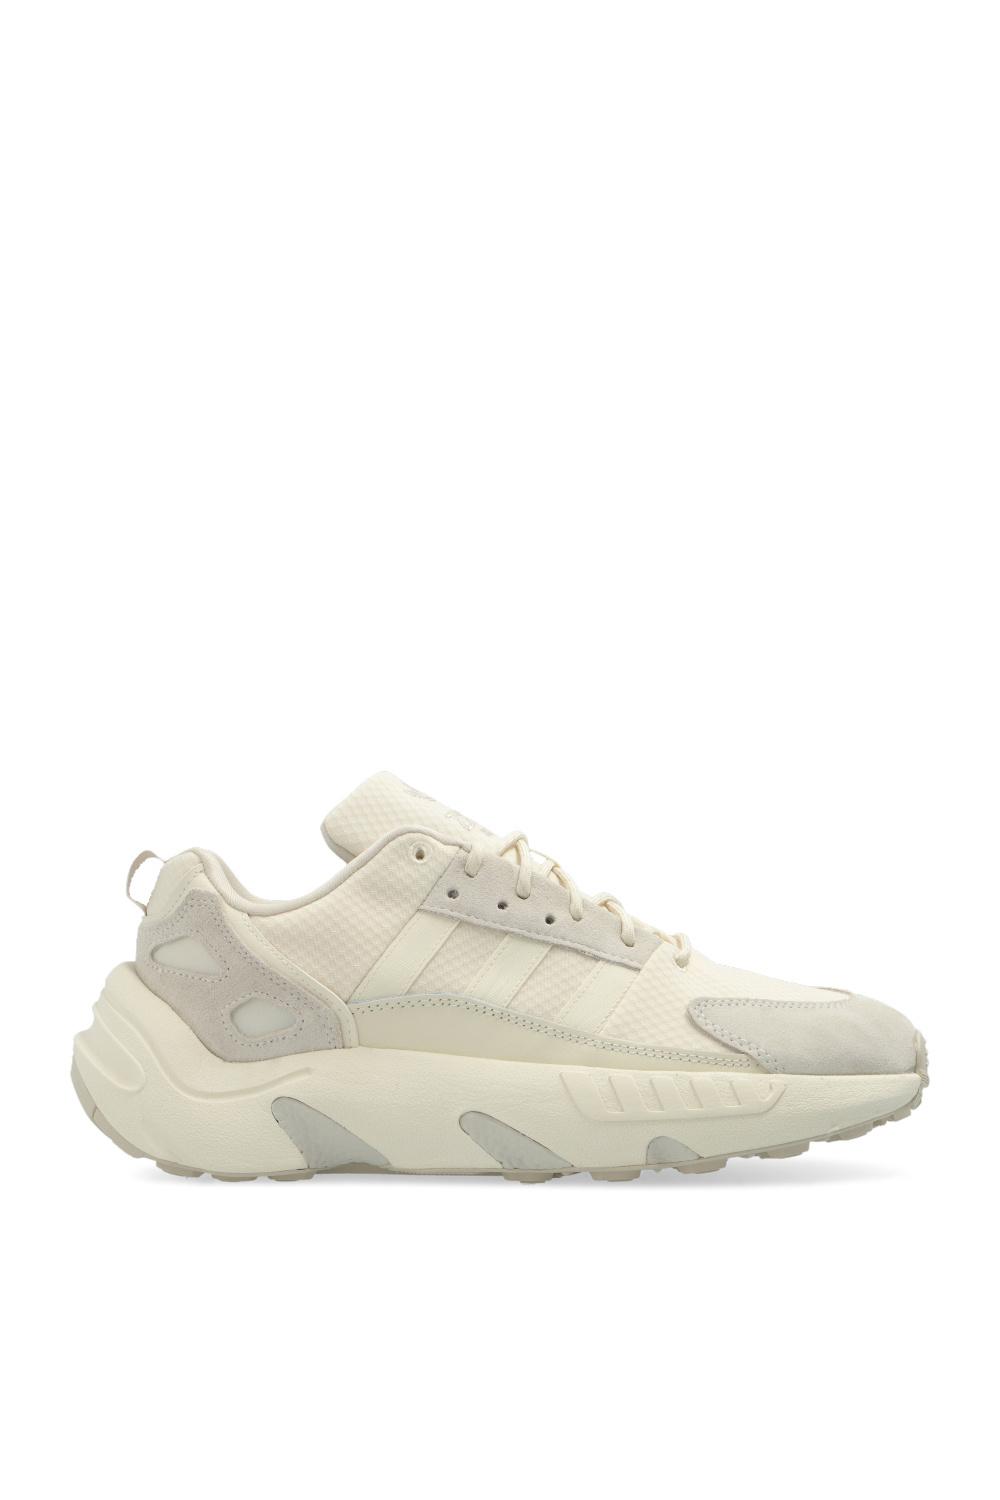 adidas Originals Leather 'zx 22 Boost' Sneakers in Cream (Natural 